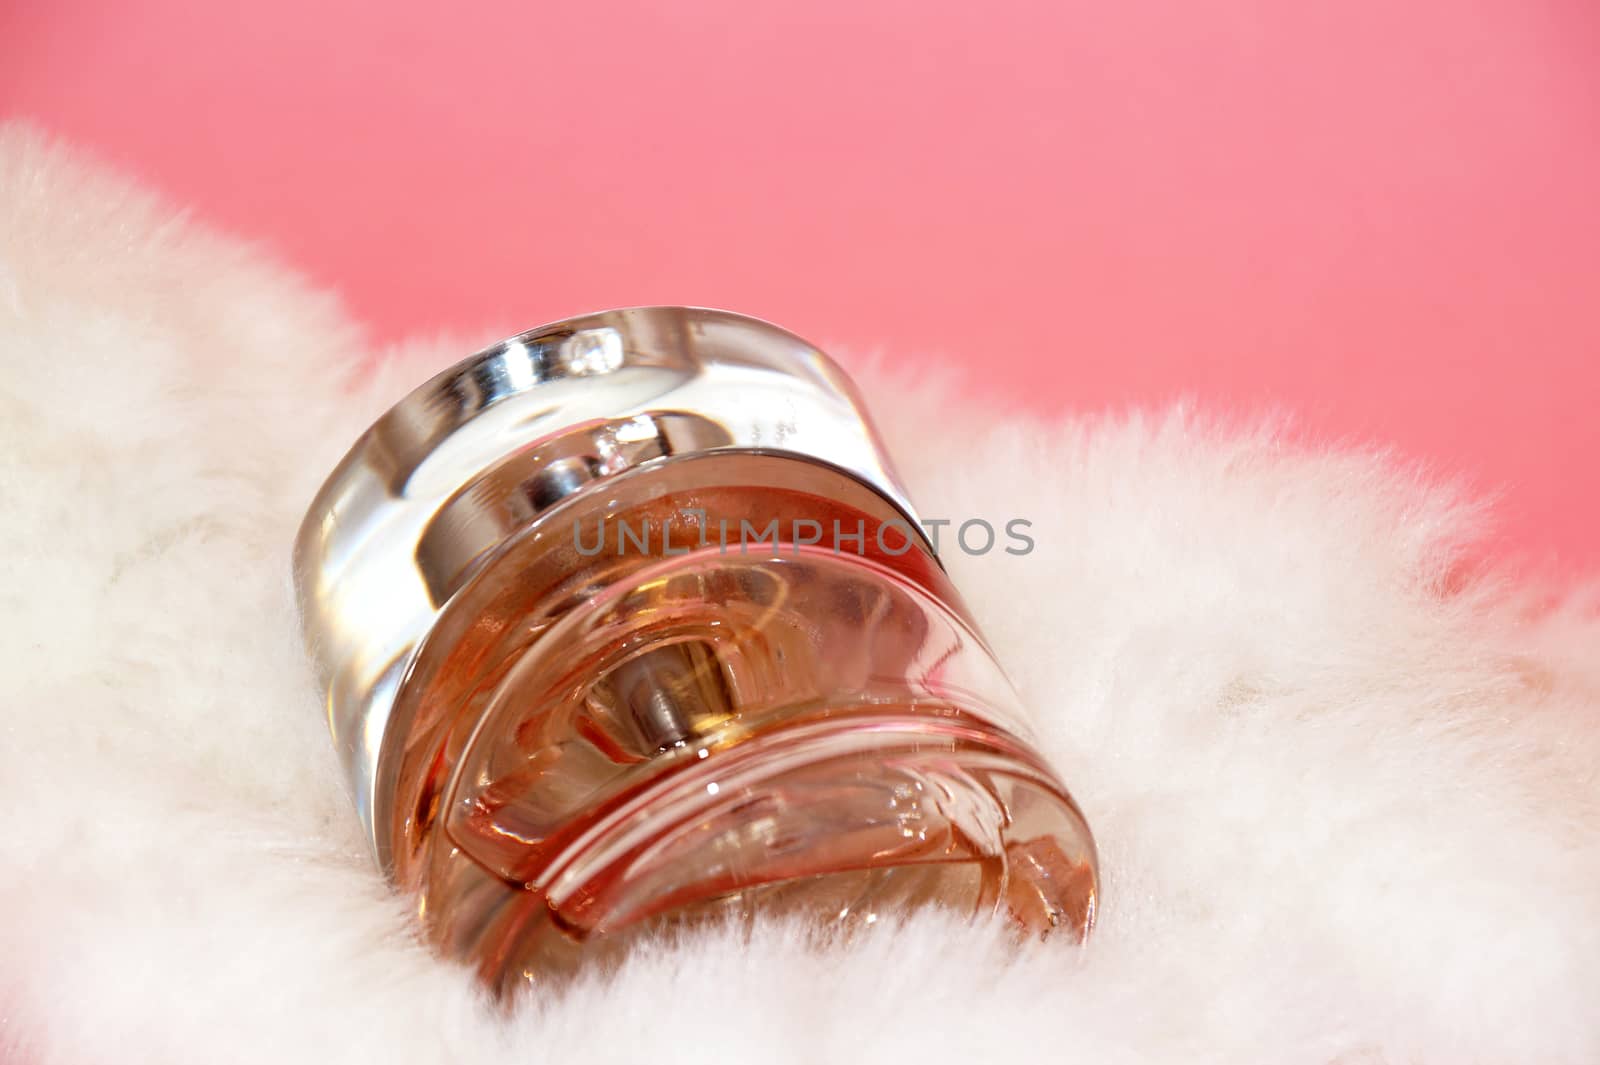 perfume bottle and white fur on a pink background close-up